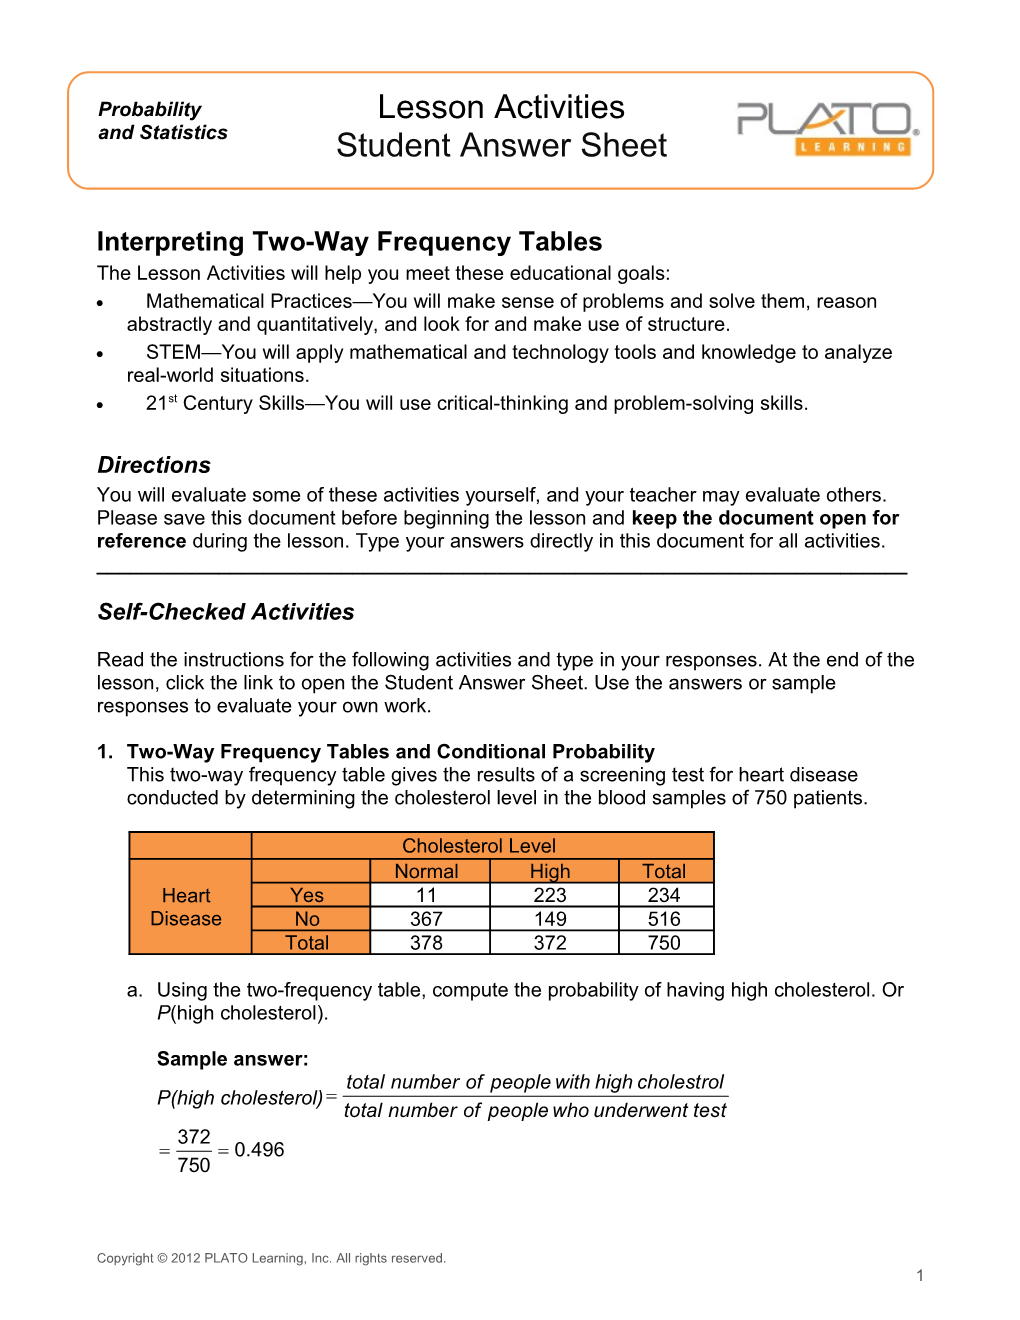 Interpreting Two-Way Frequency Tables